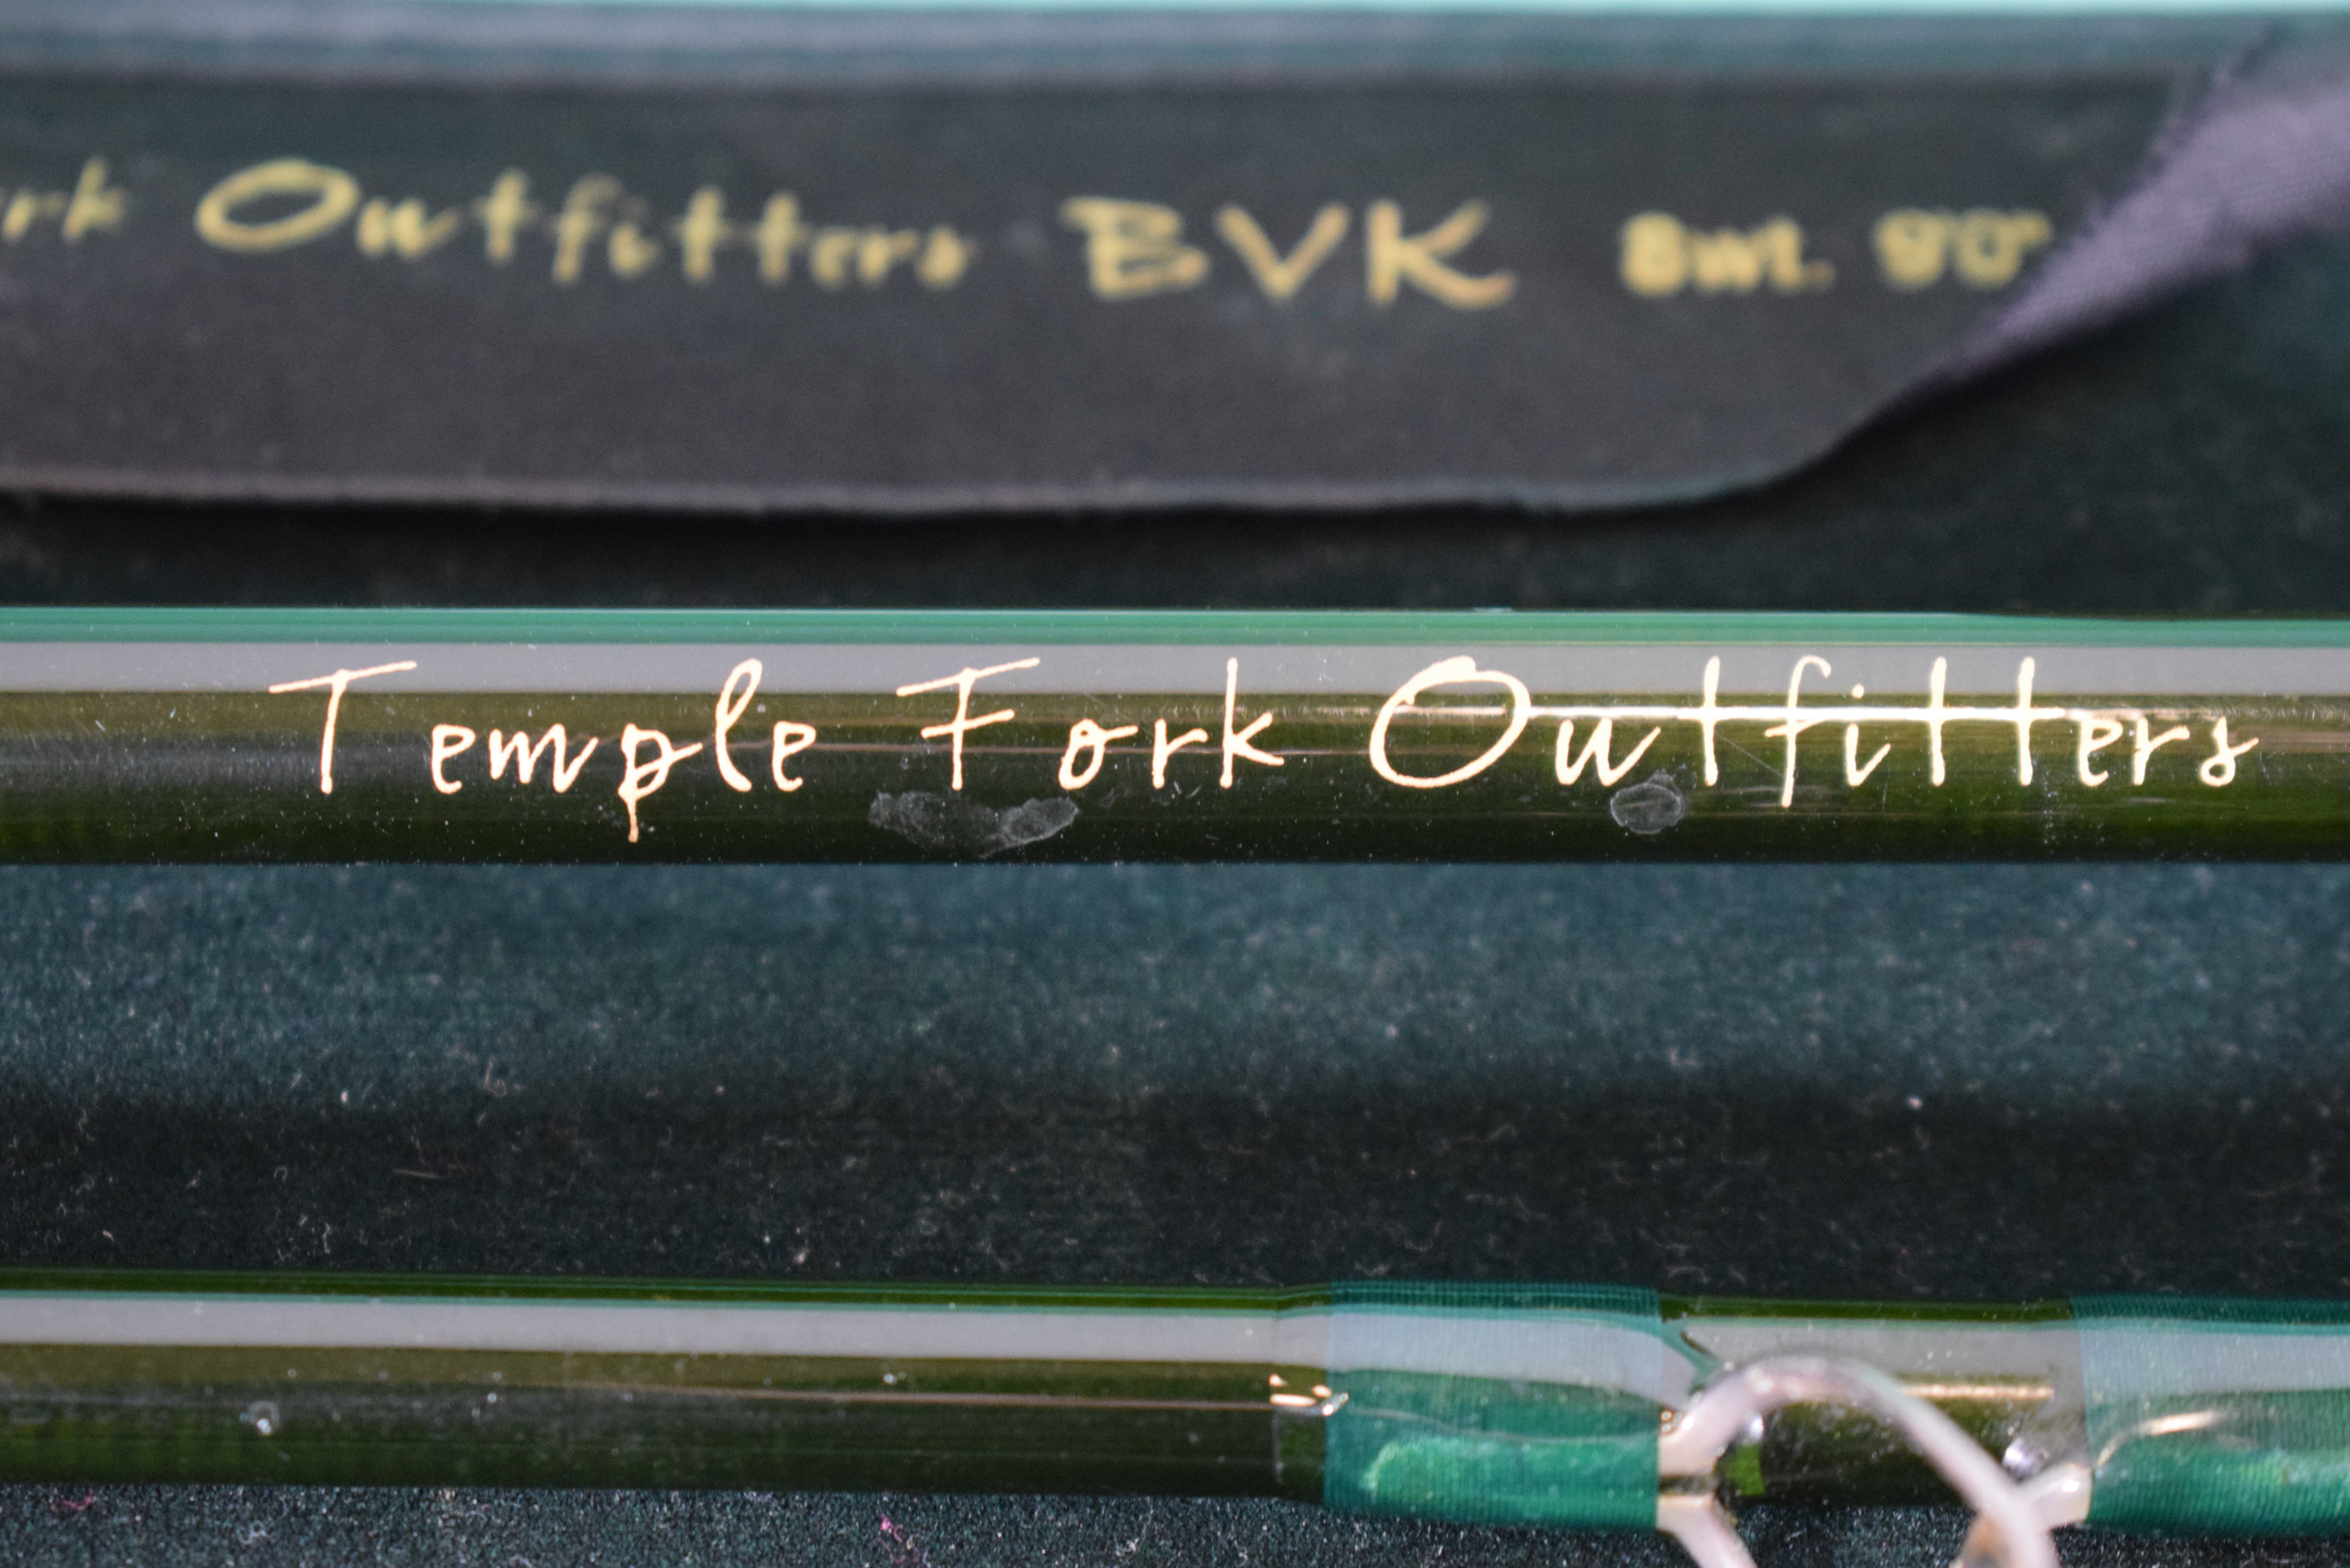 Four piece fly rod by Temple Fork Outfitters BVK  9ft rod.  With original velvet case - Image 3 of 3